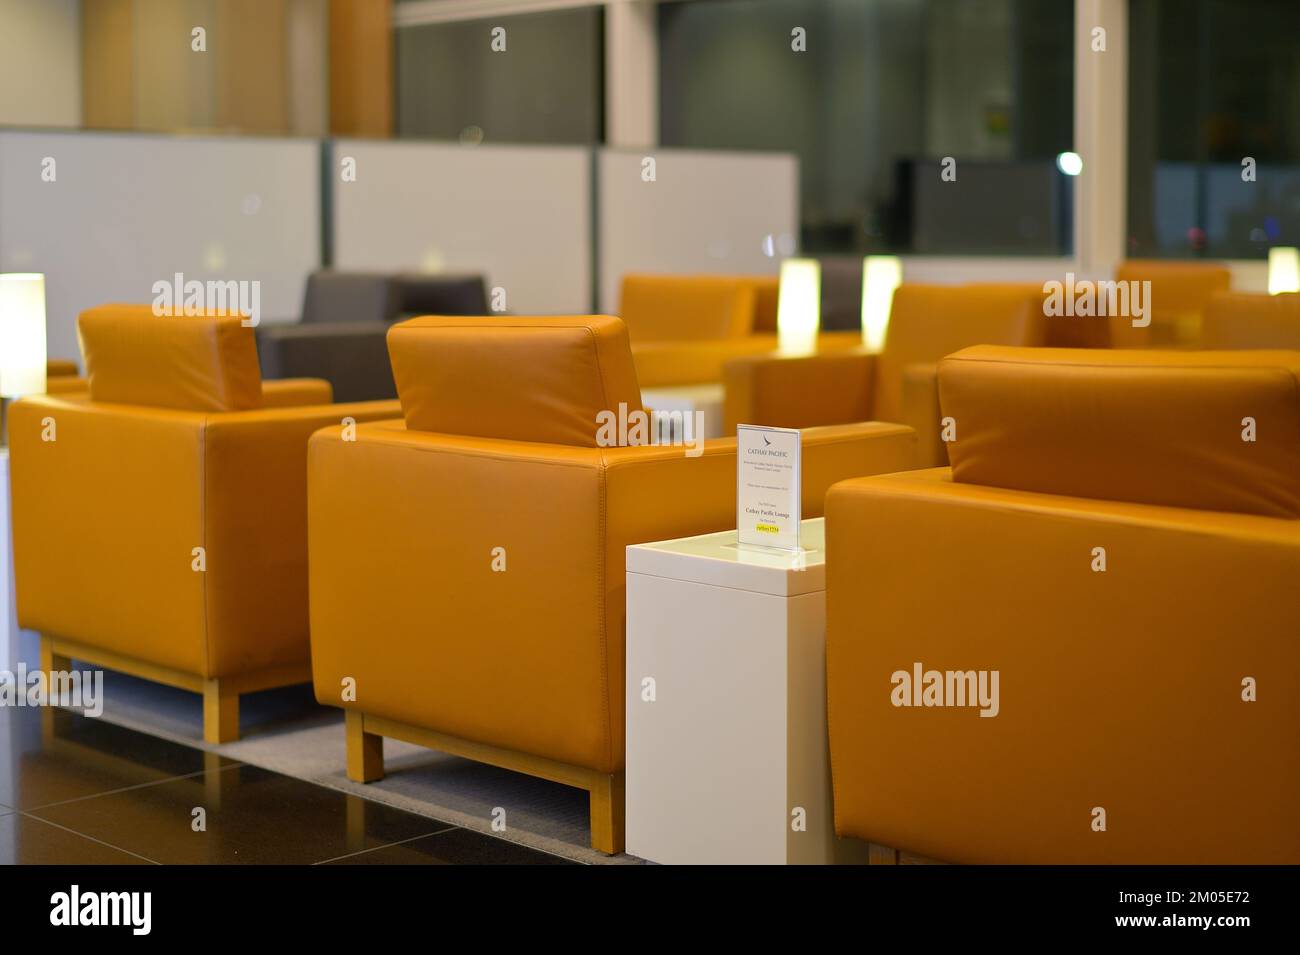 Cathay Pacific (CX) Business and First Class Lounge, San Francisco International Airport CA Stock Photo